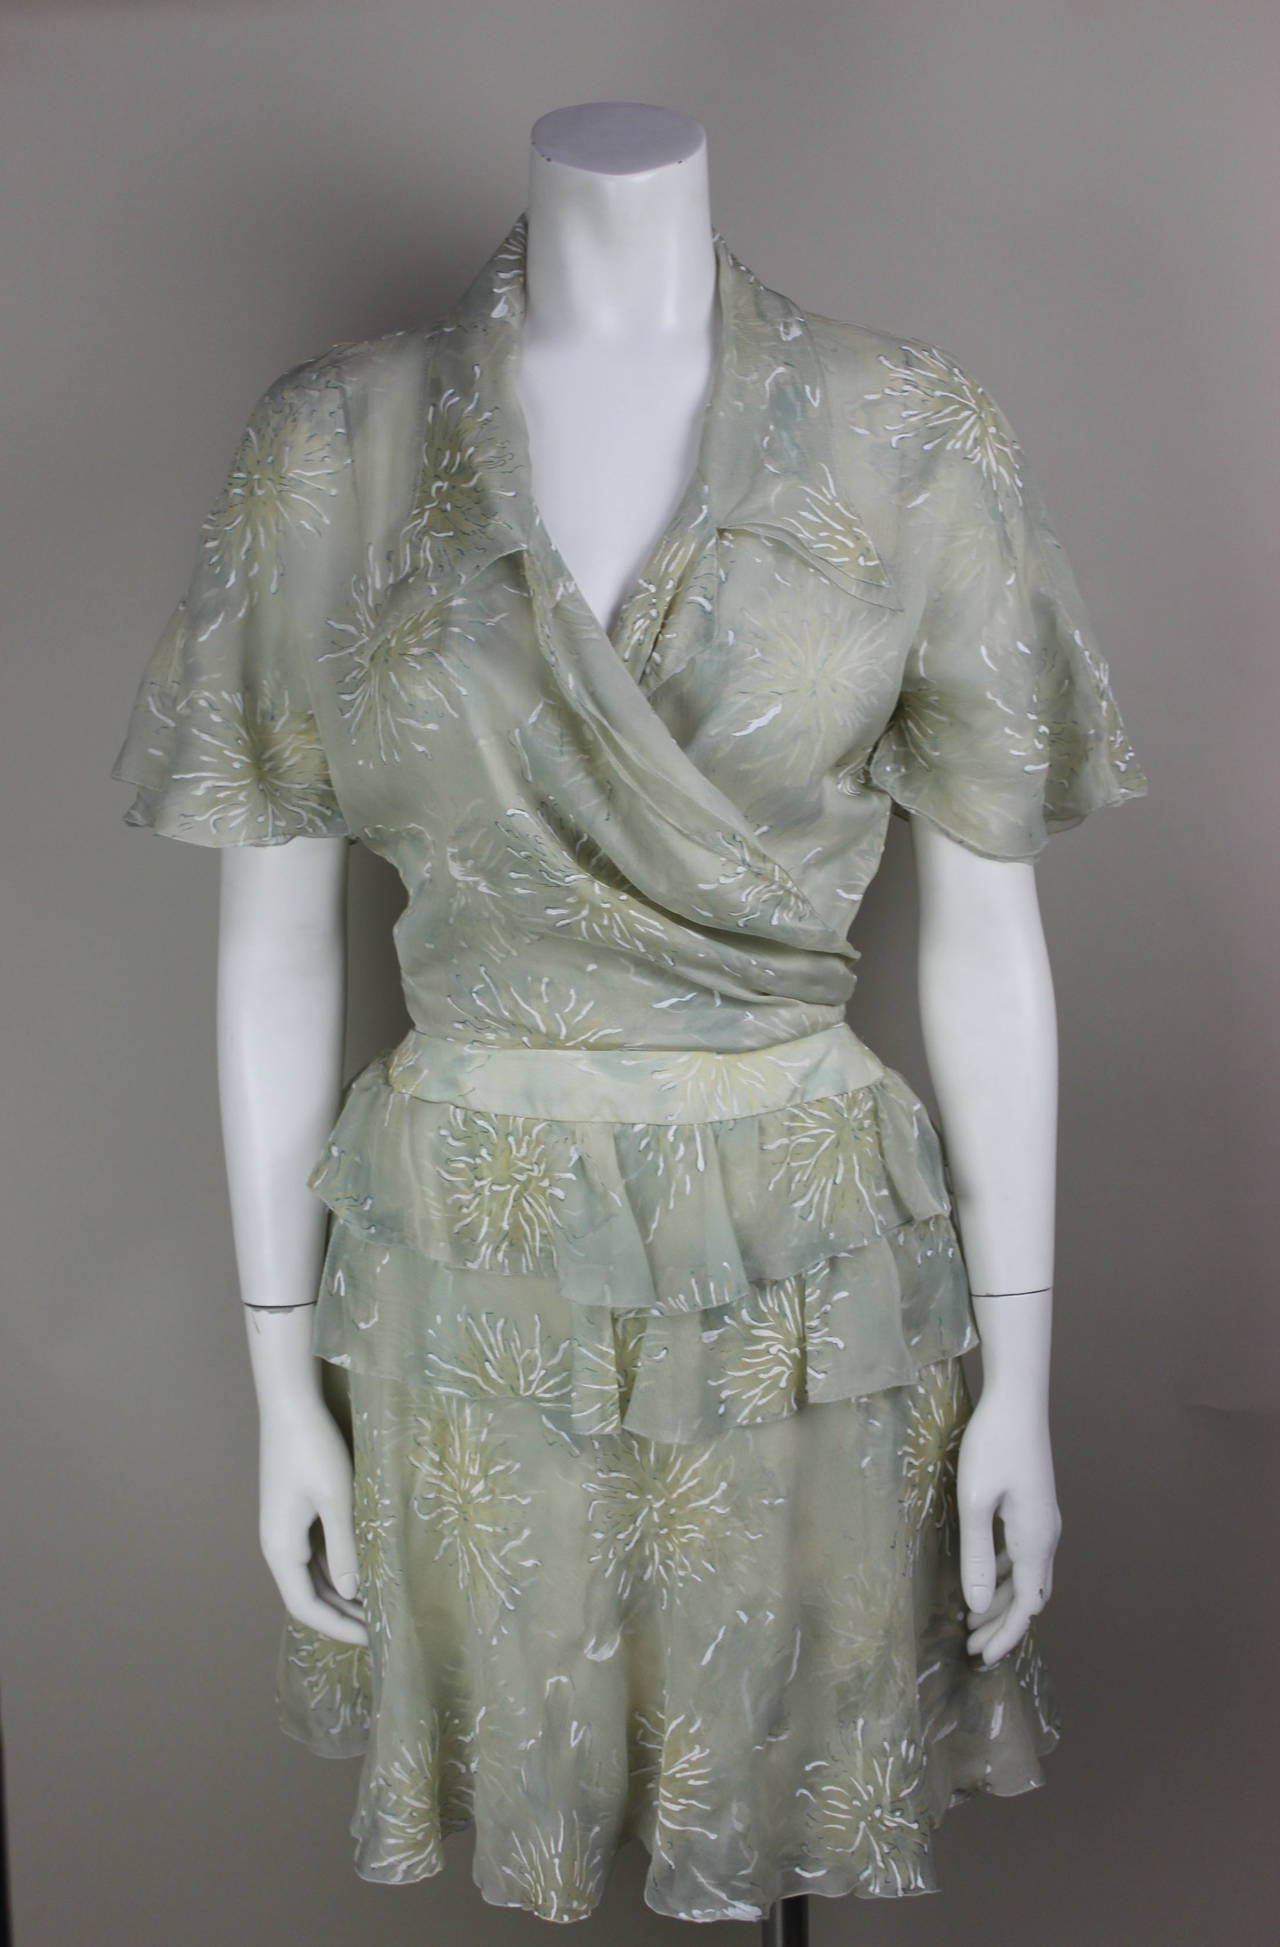 This lovely 100% silk two piece has a short ruffly skirt and a delicate wrap top with a butterfly sleeve. The pattern is a muted floral that appears to be hand painted. These two garments are versatile and can be paired with other clothing to create